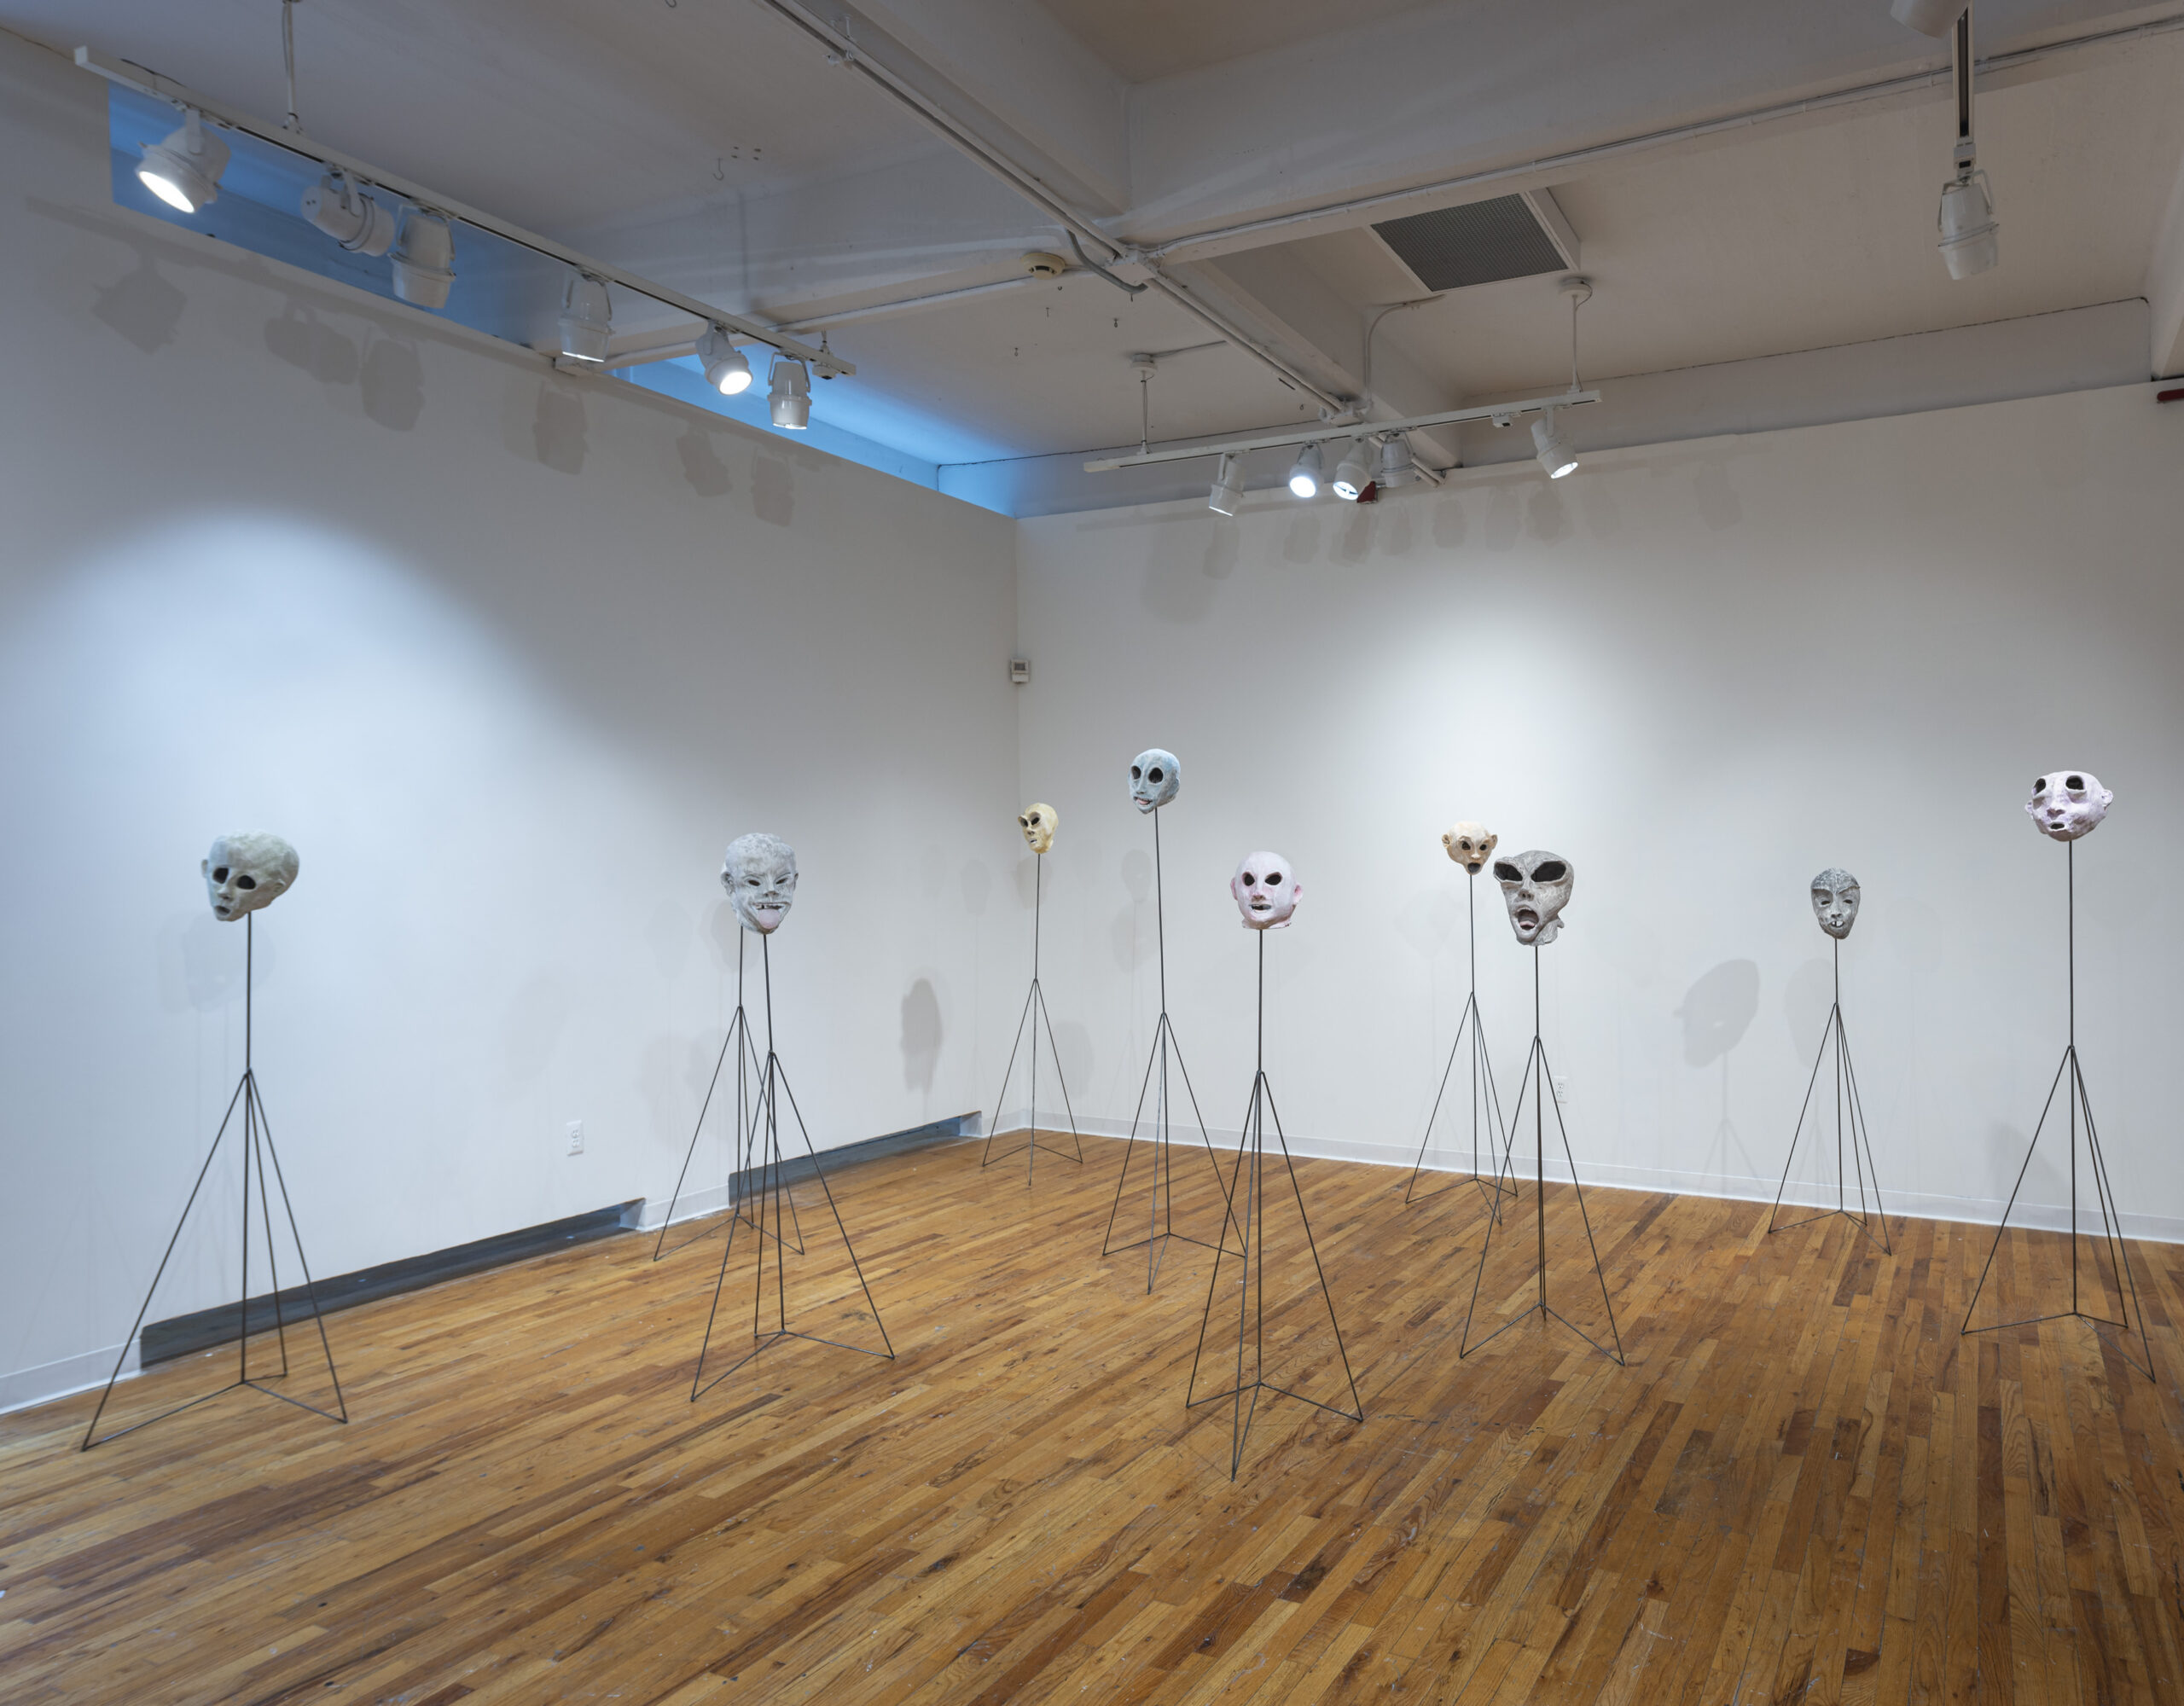 a gallery setting, with 7 face mask sculptures